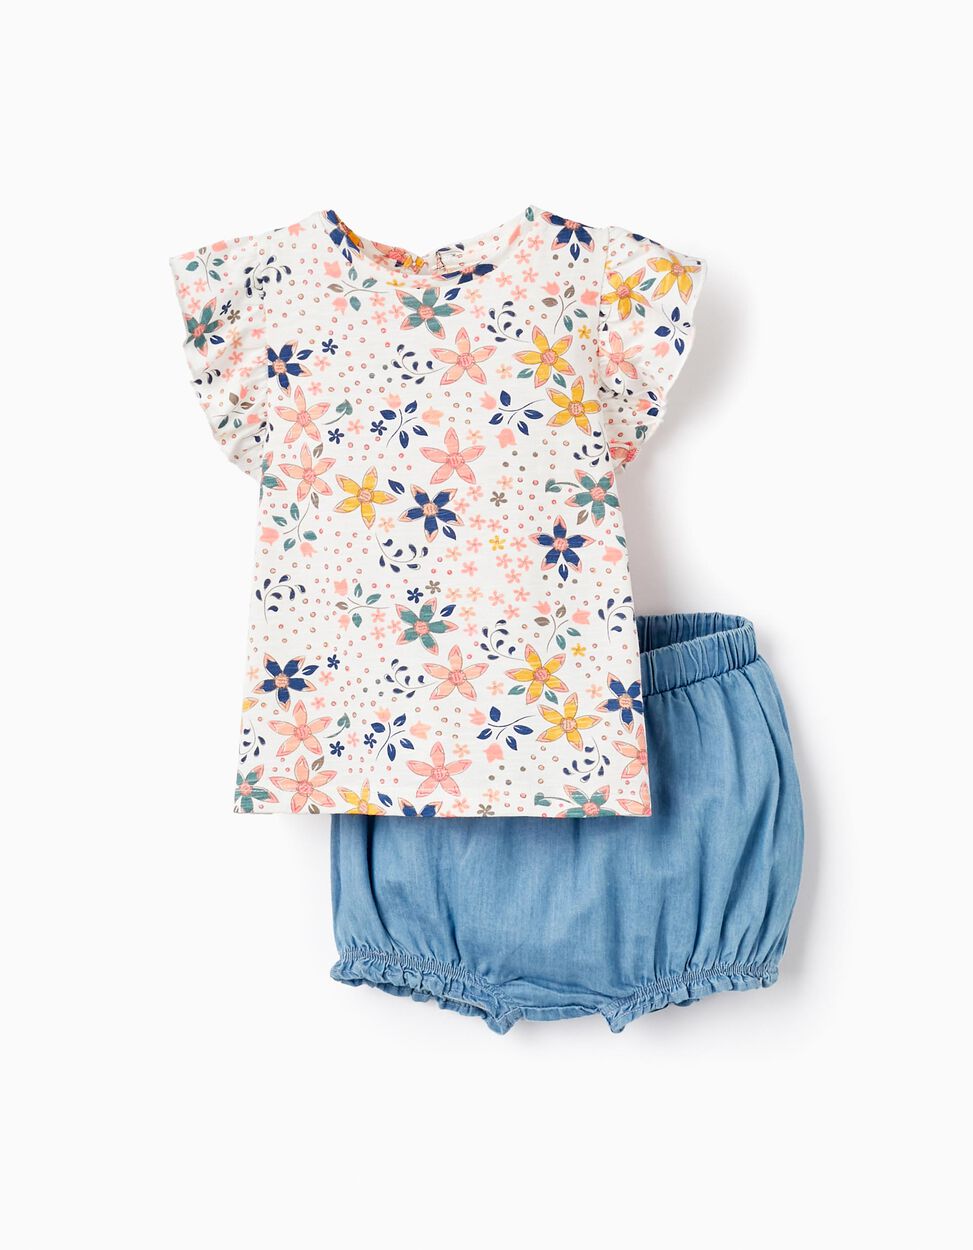 Buy Online T-shirt + Bloomers for Baby Girls, White/Blue